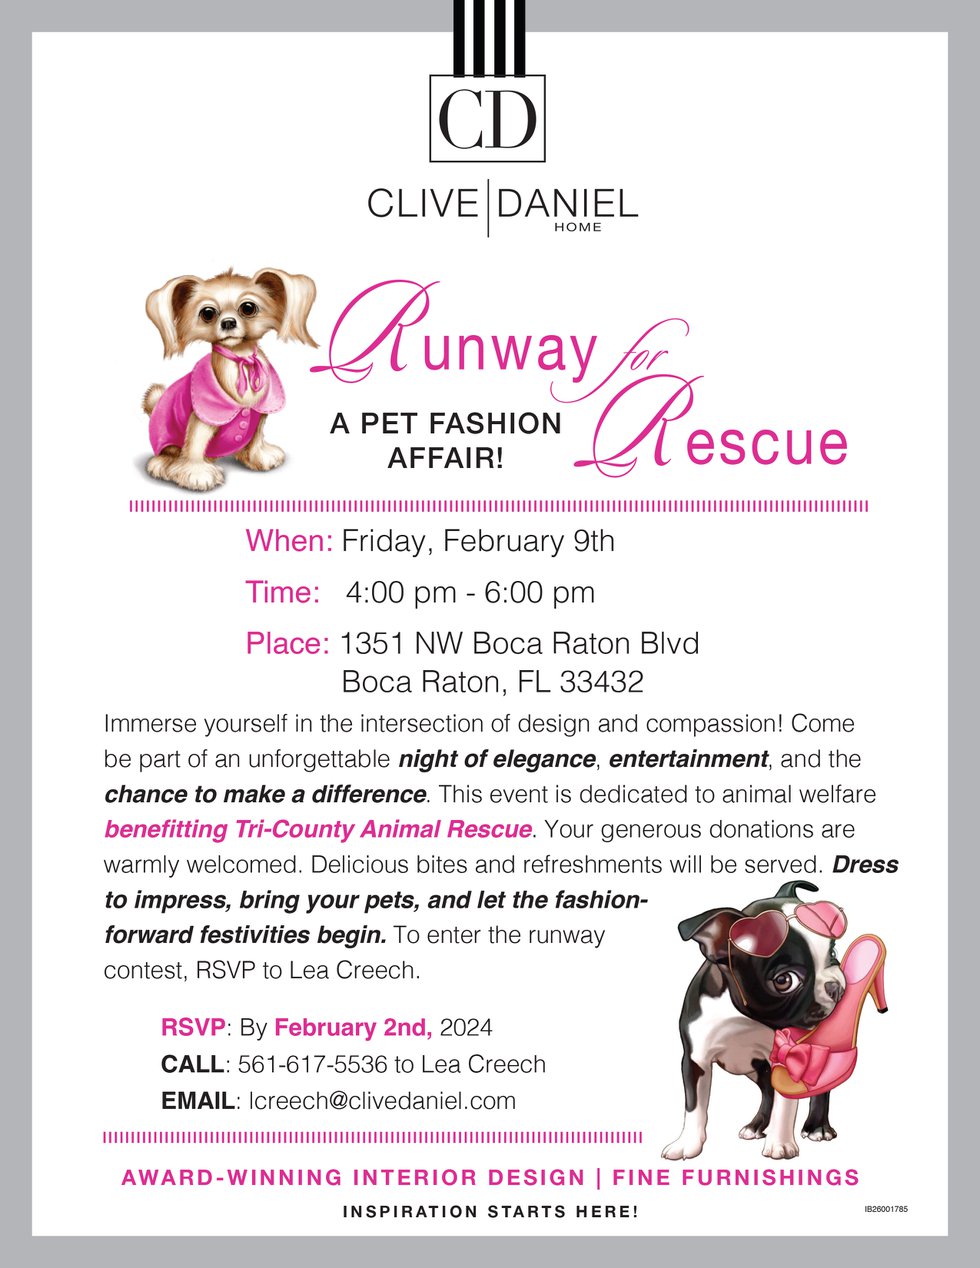 Updated_Runway For Resue_Invite Flyers_Boca Events_Jan2024.indd